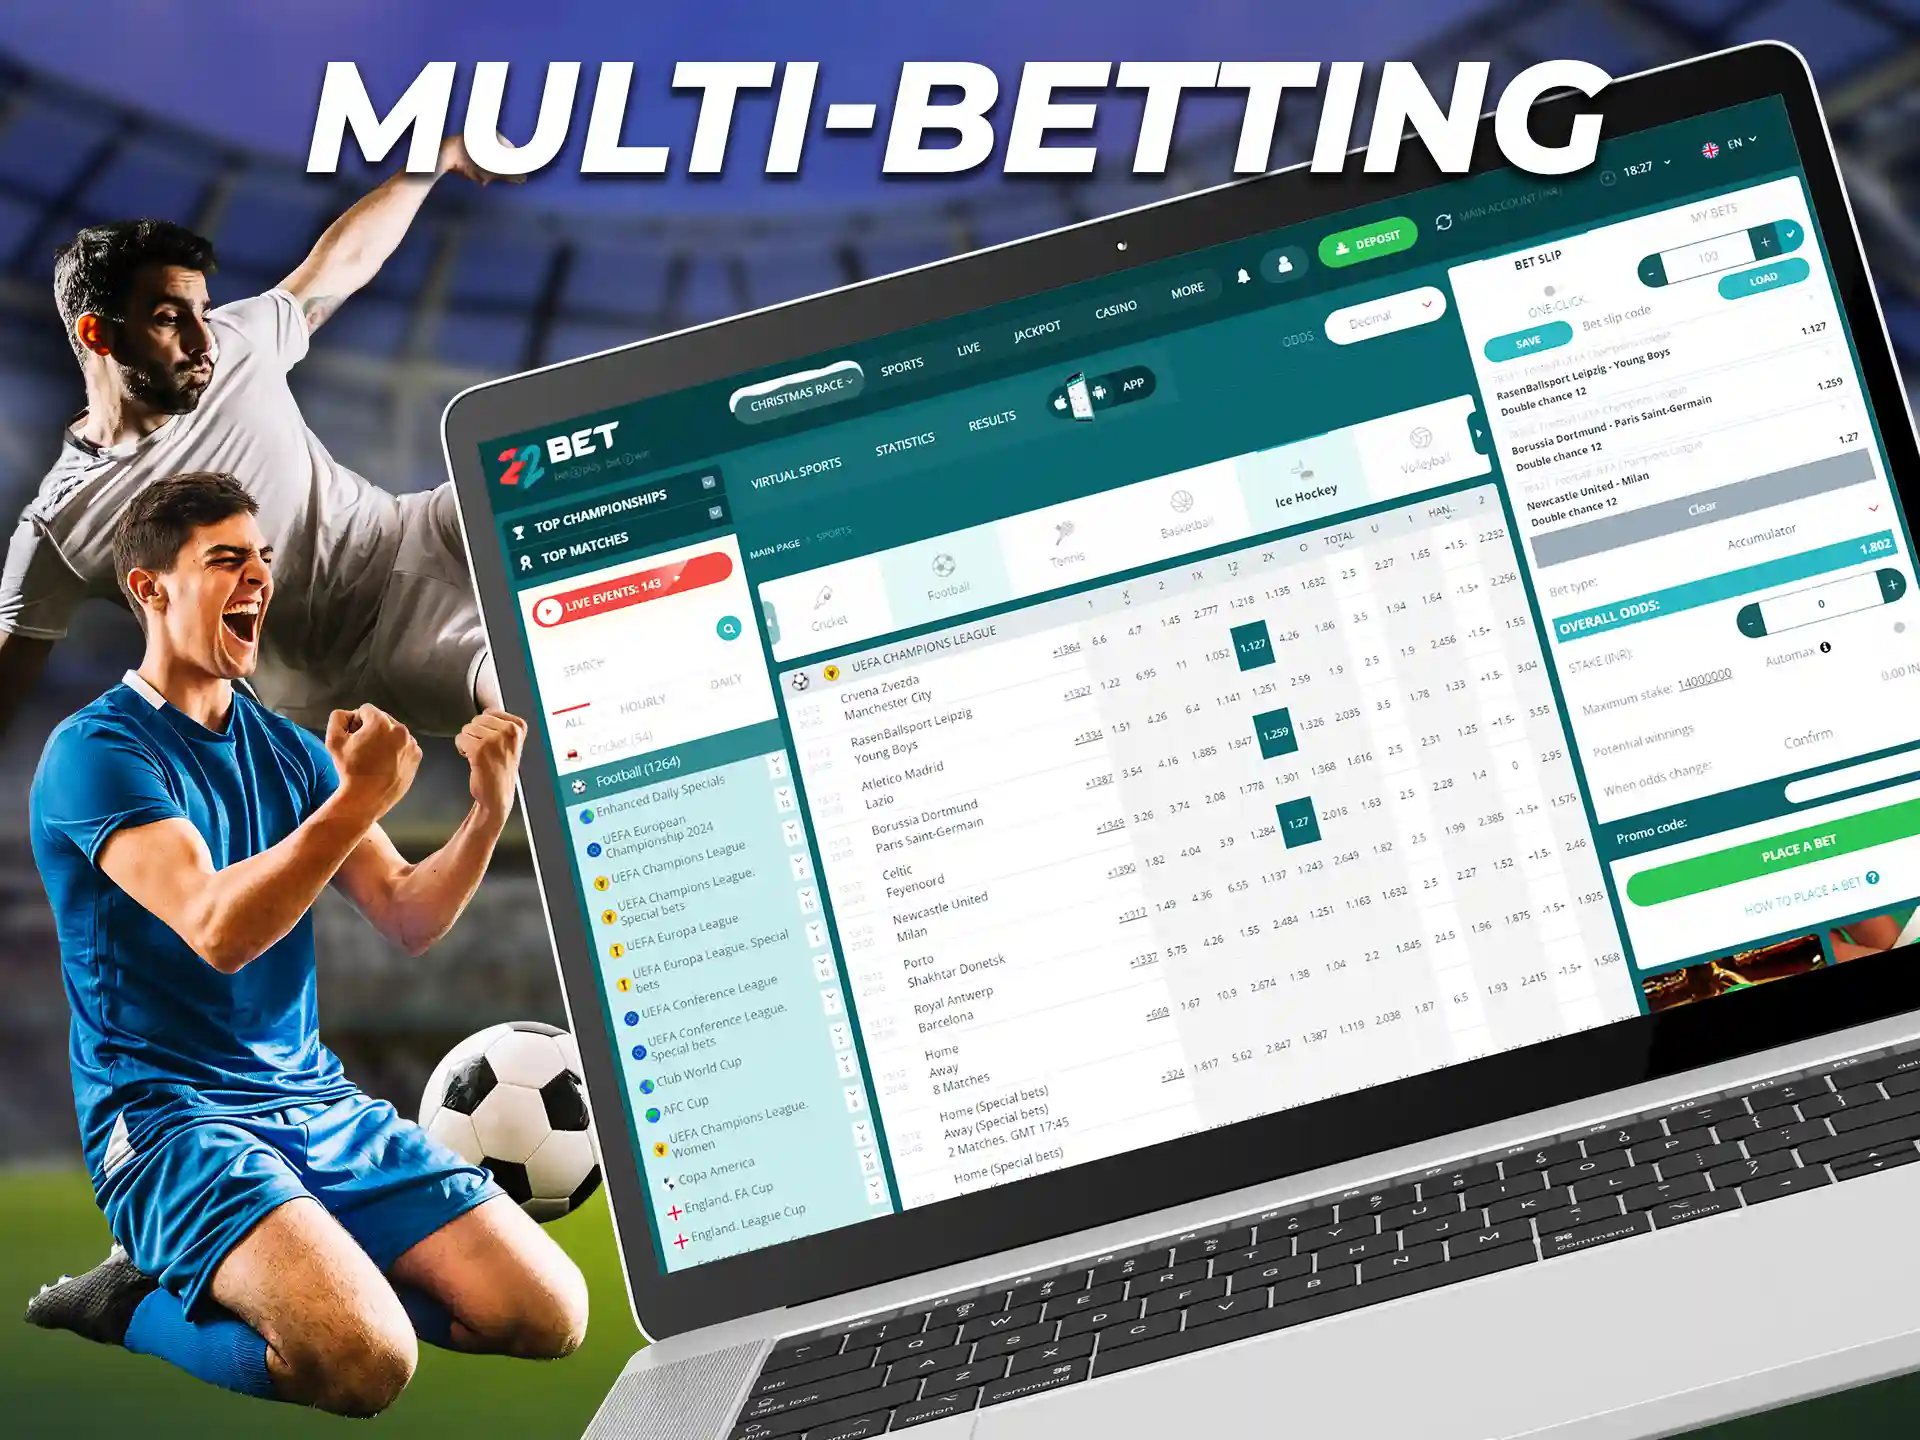 Betting on multiple events at the same time is real for 22Bet players.